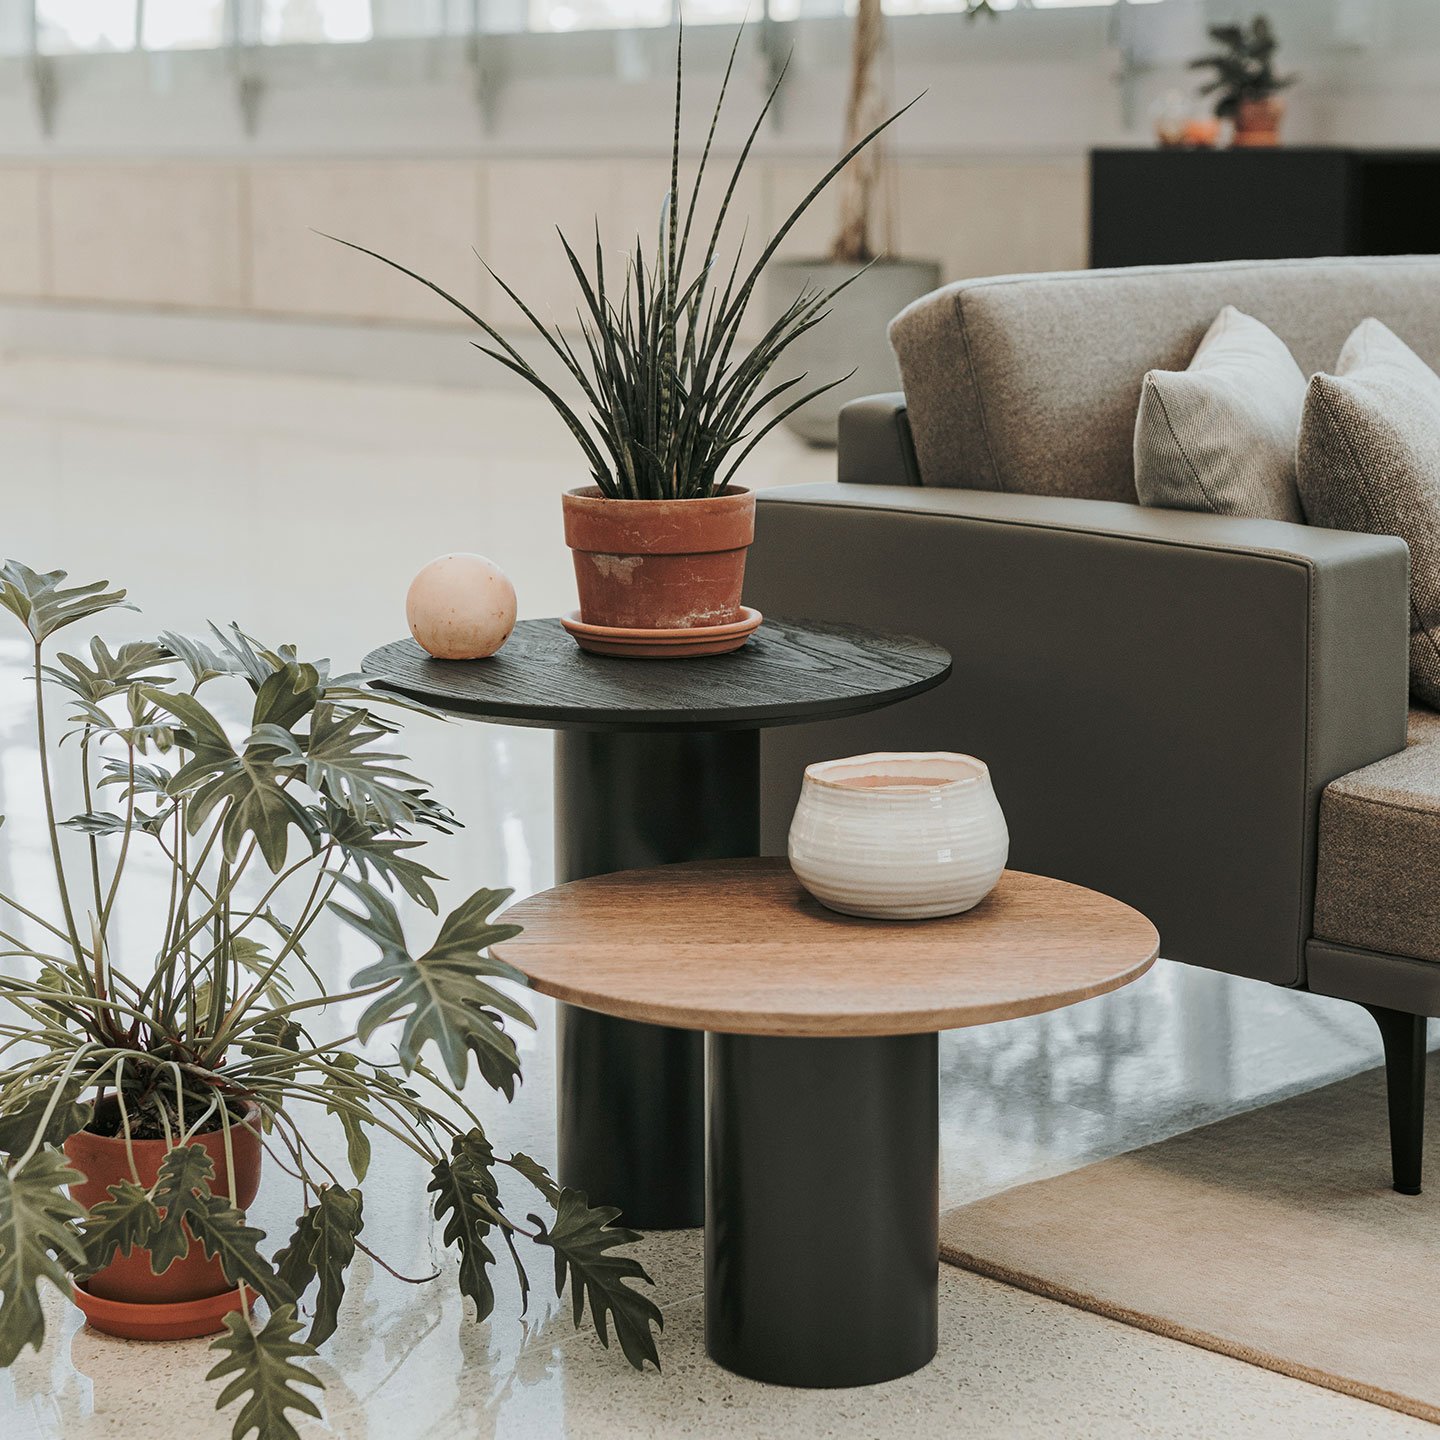 Haworth Mush Table in a office lobby as a side table with a plant on it